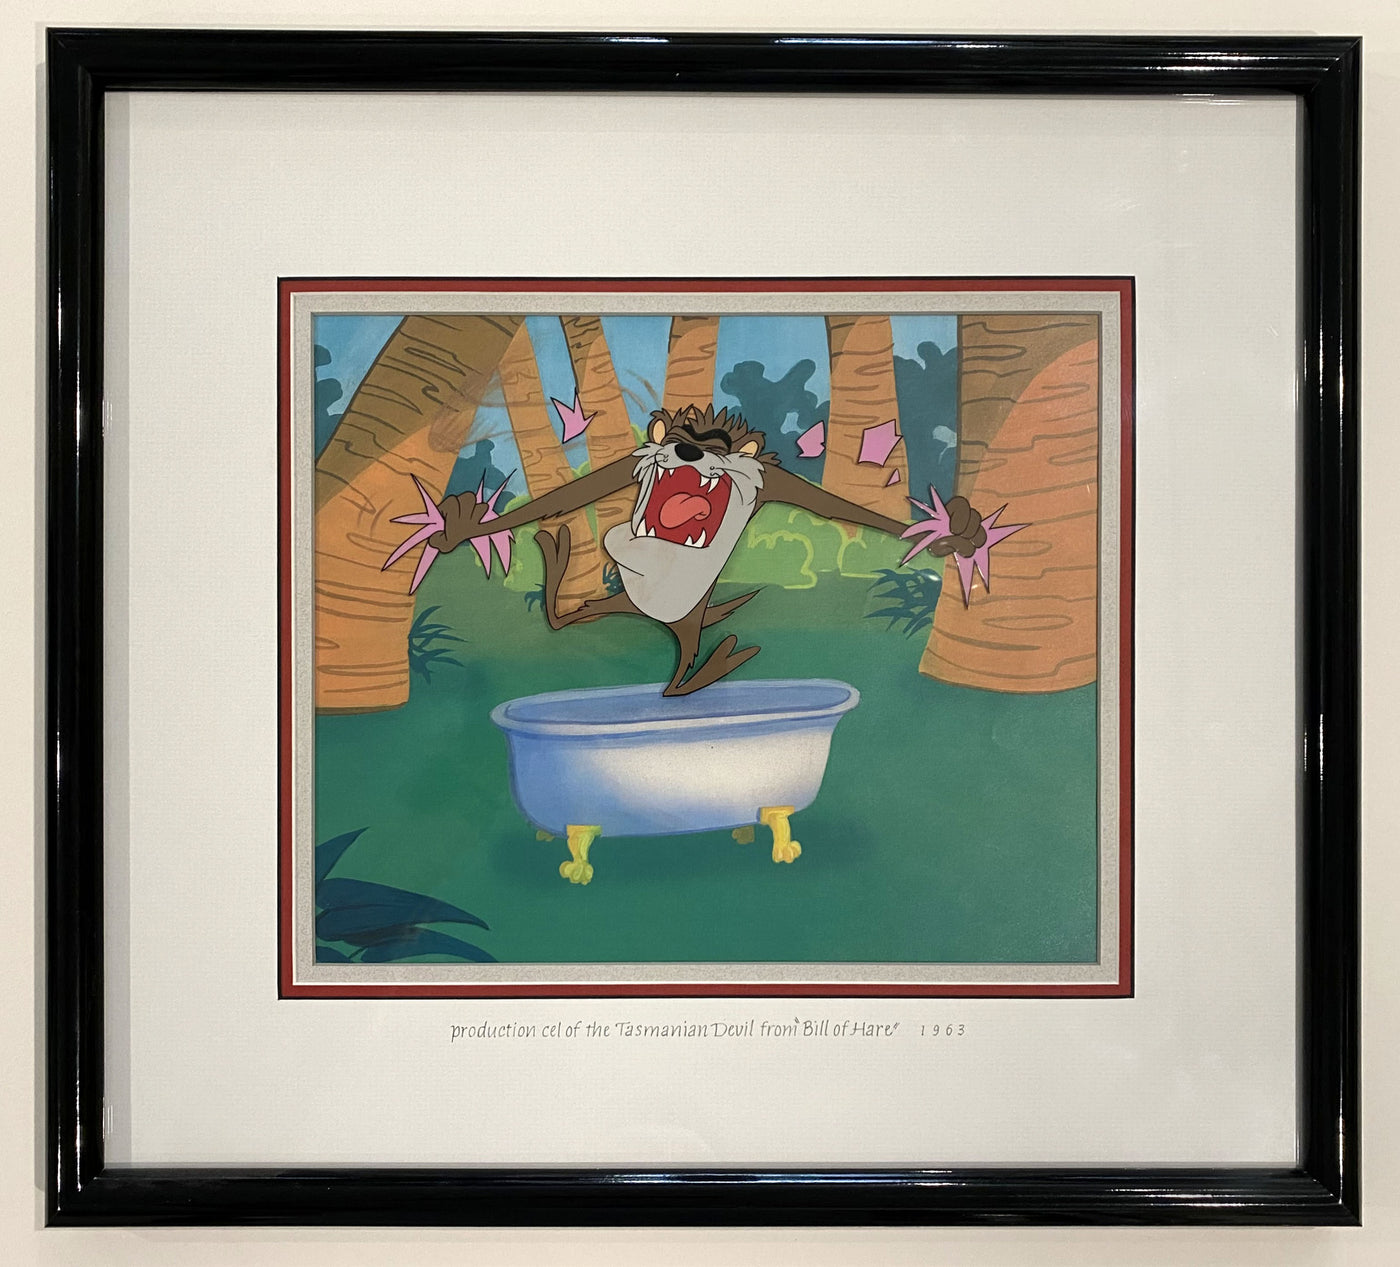 Original Warner Brothers Production Cel of Taz from Bill of Hare (1963)